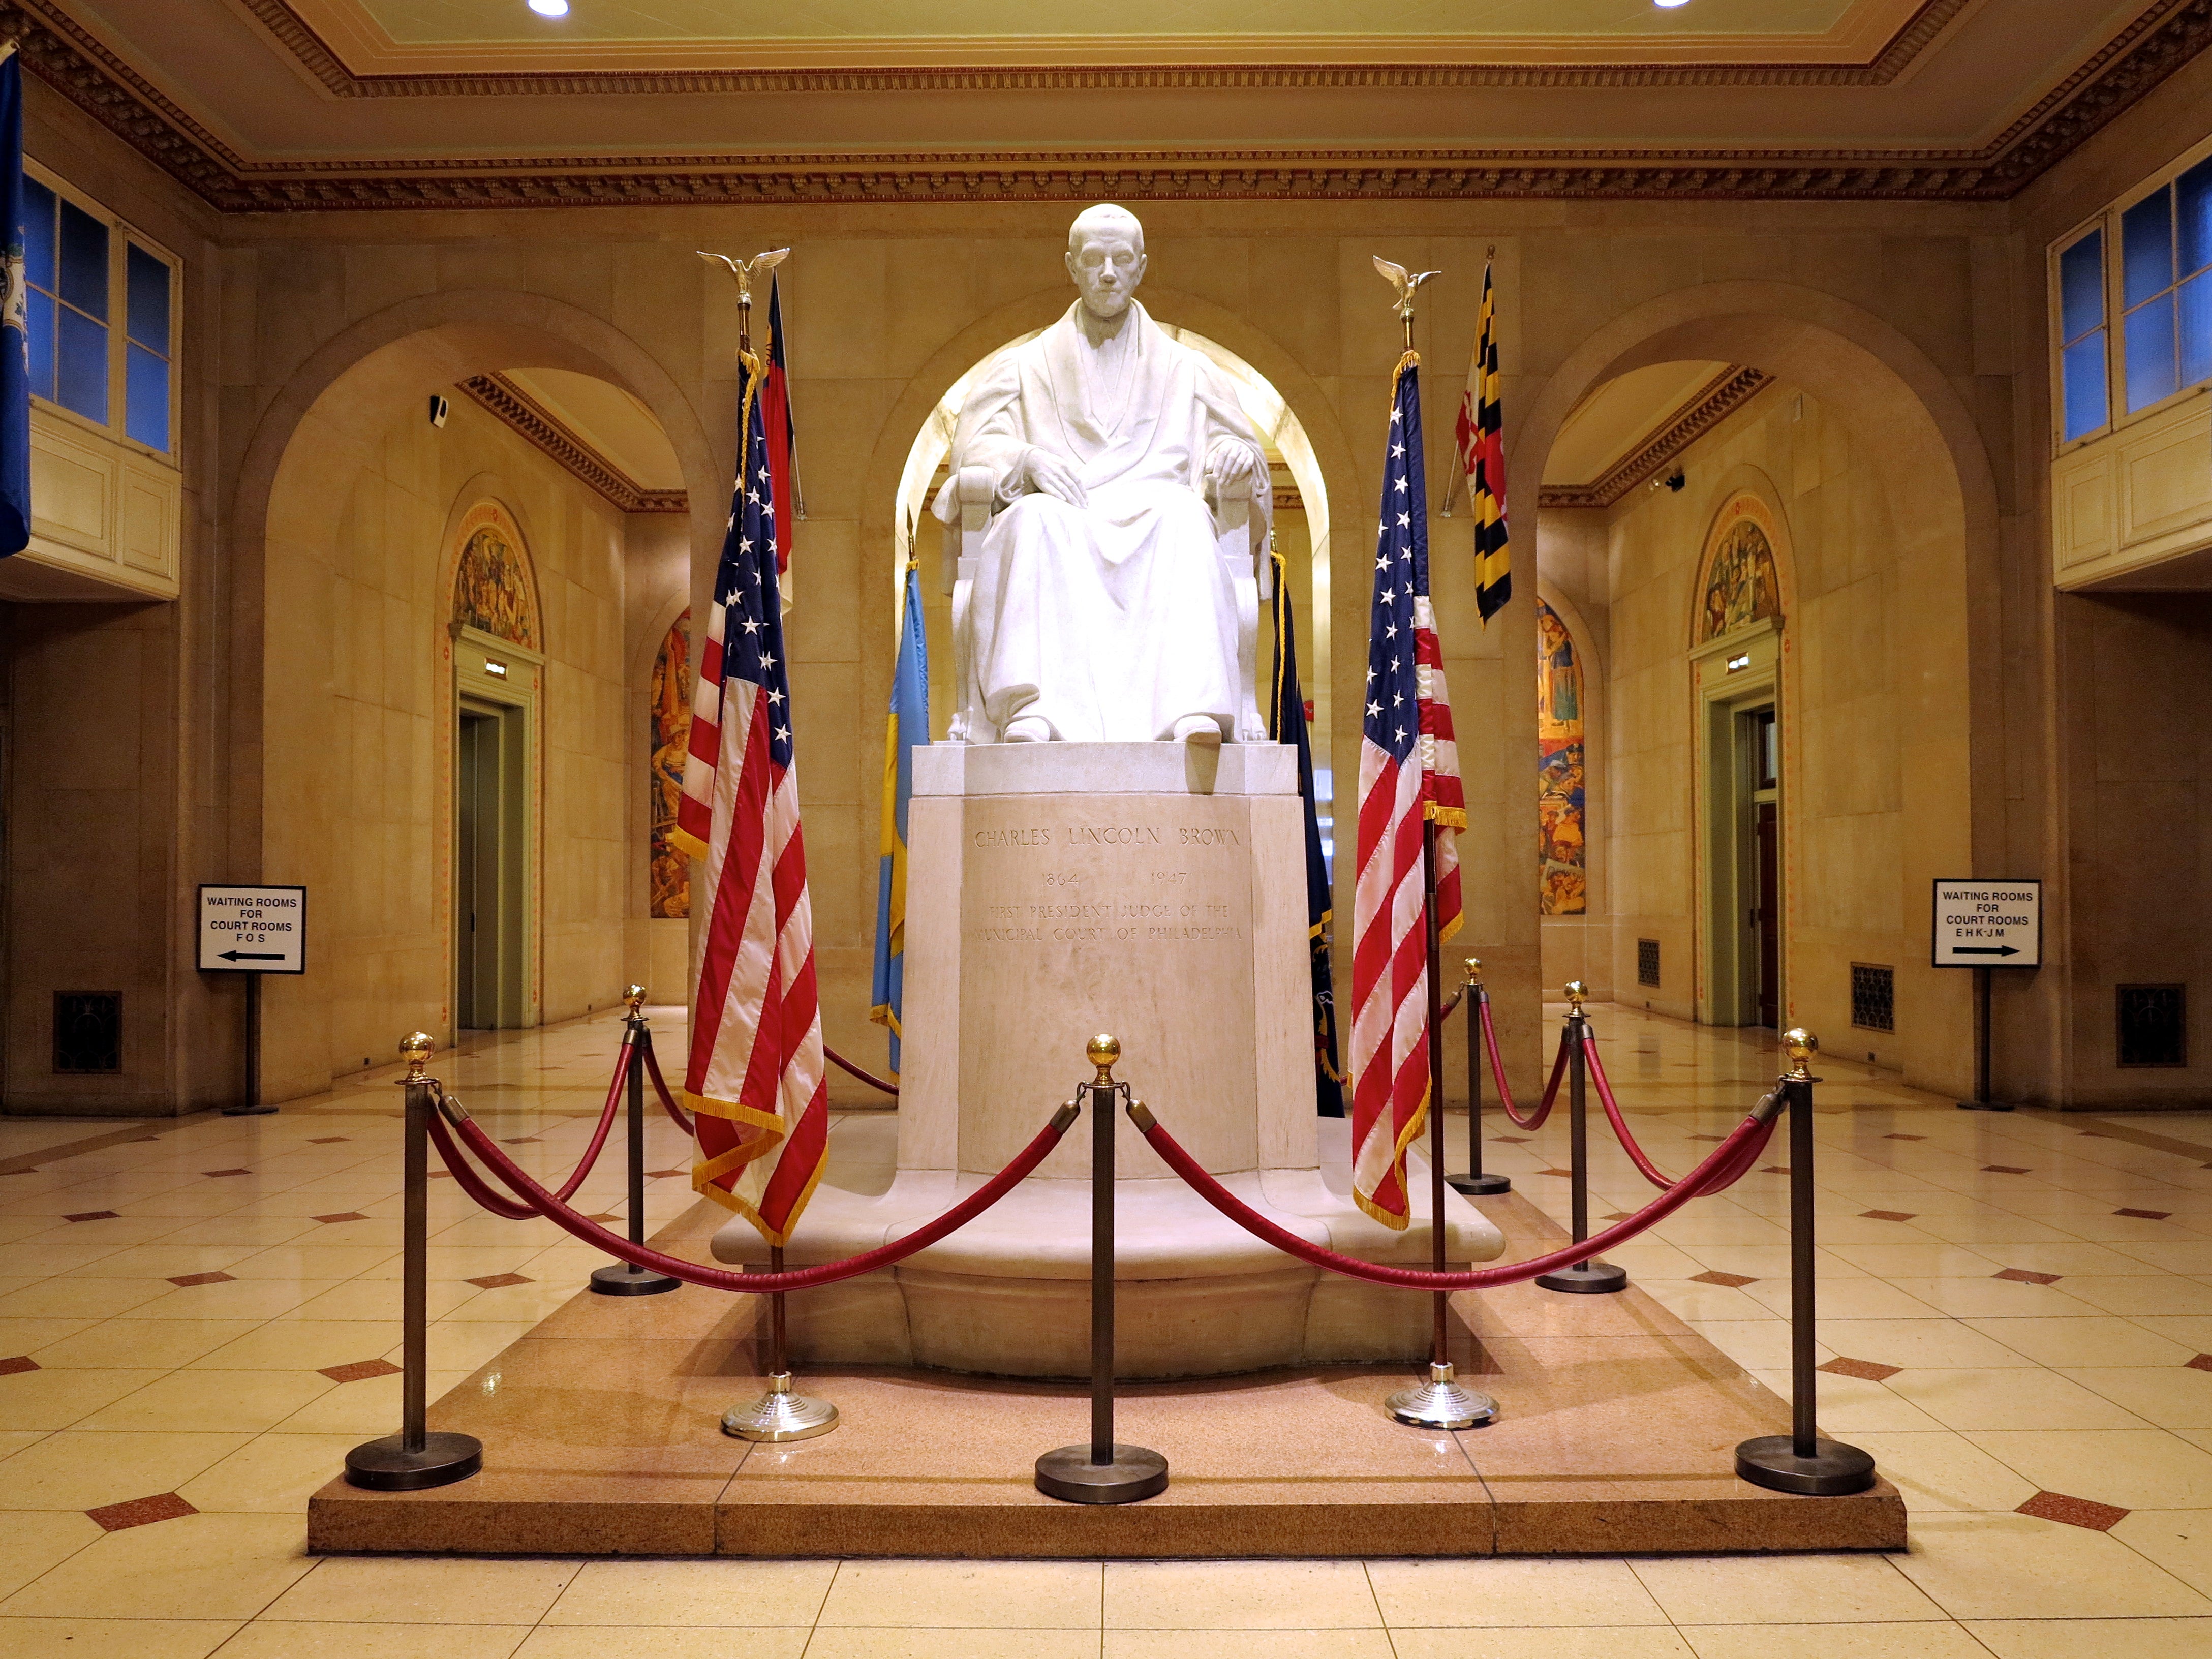 This statue of Judge Charles Lincoln Brown sits in the center of the Family Court's main hall.